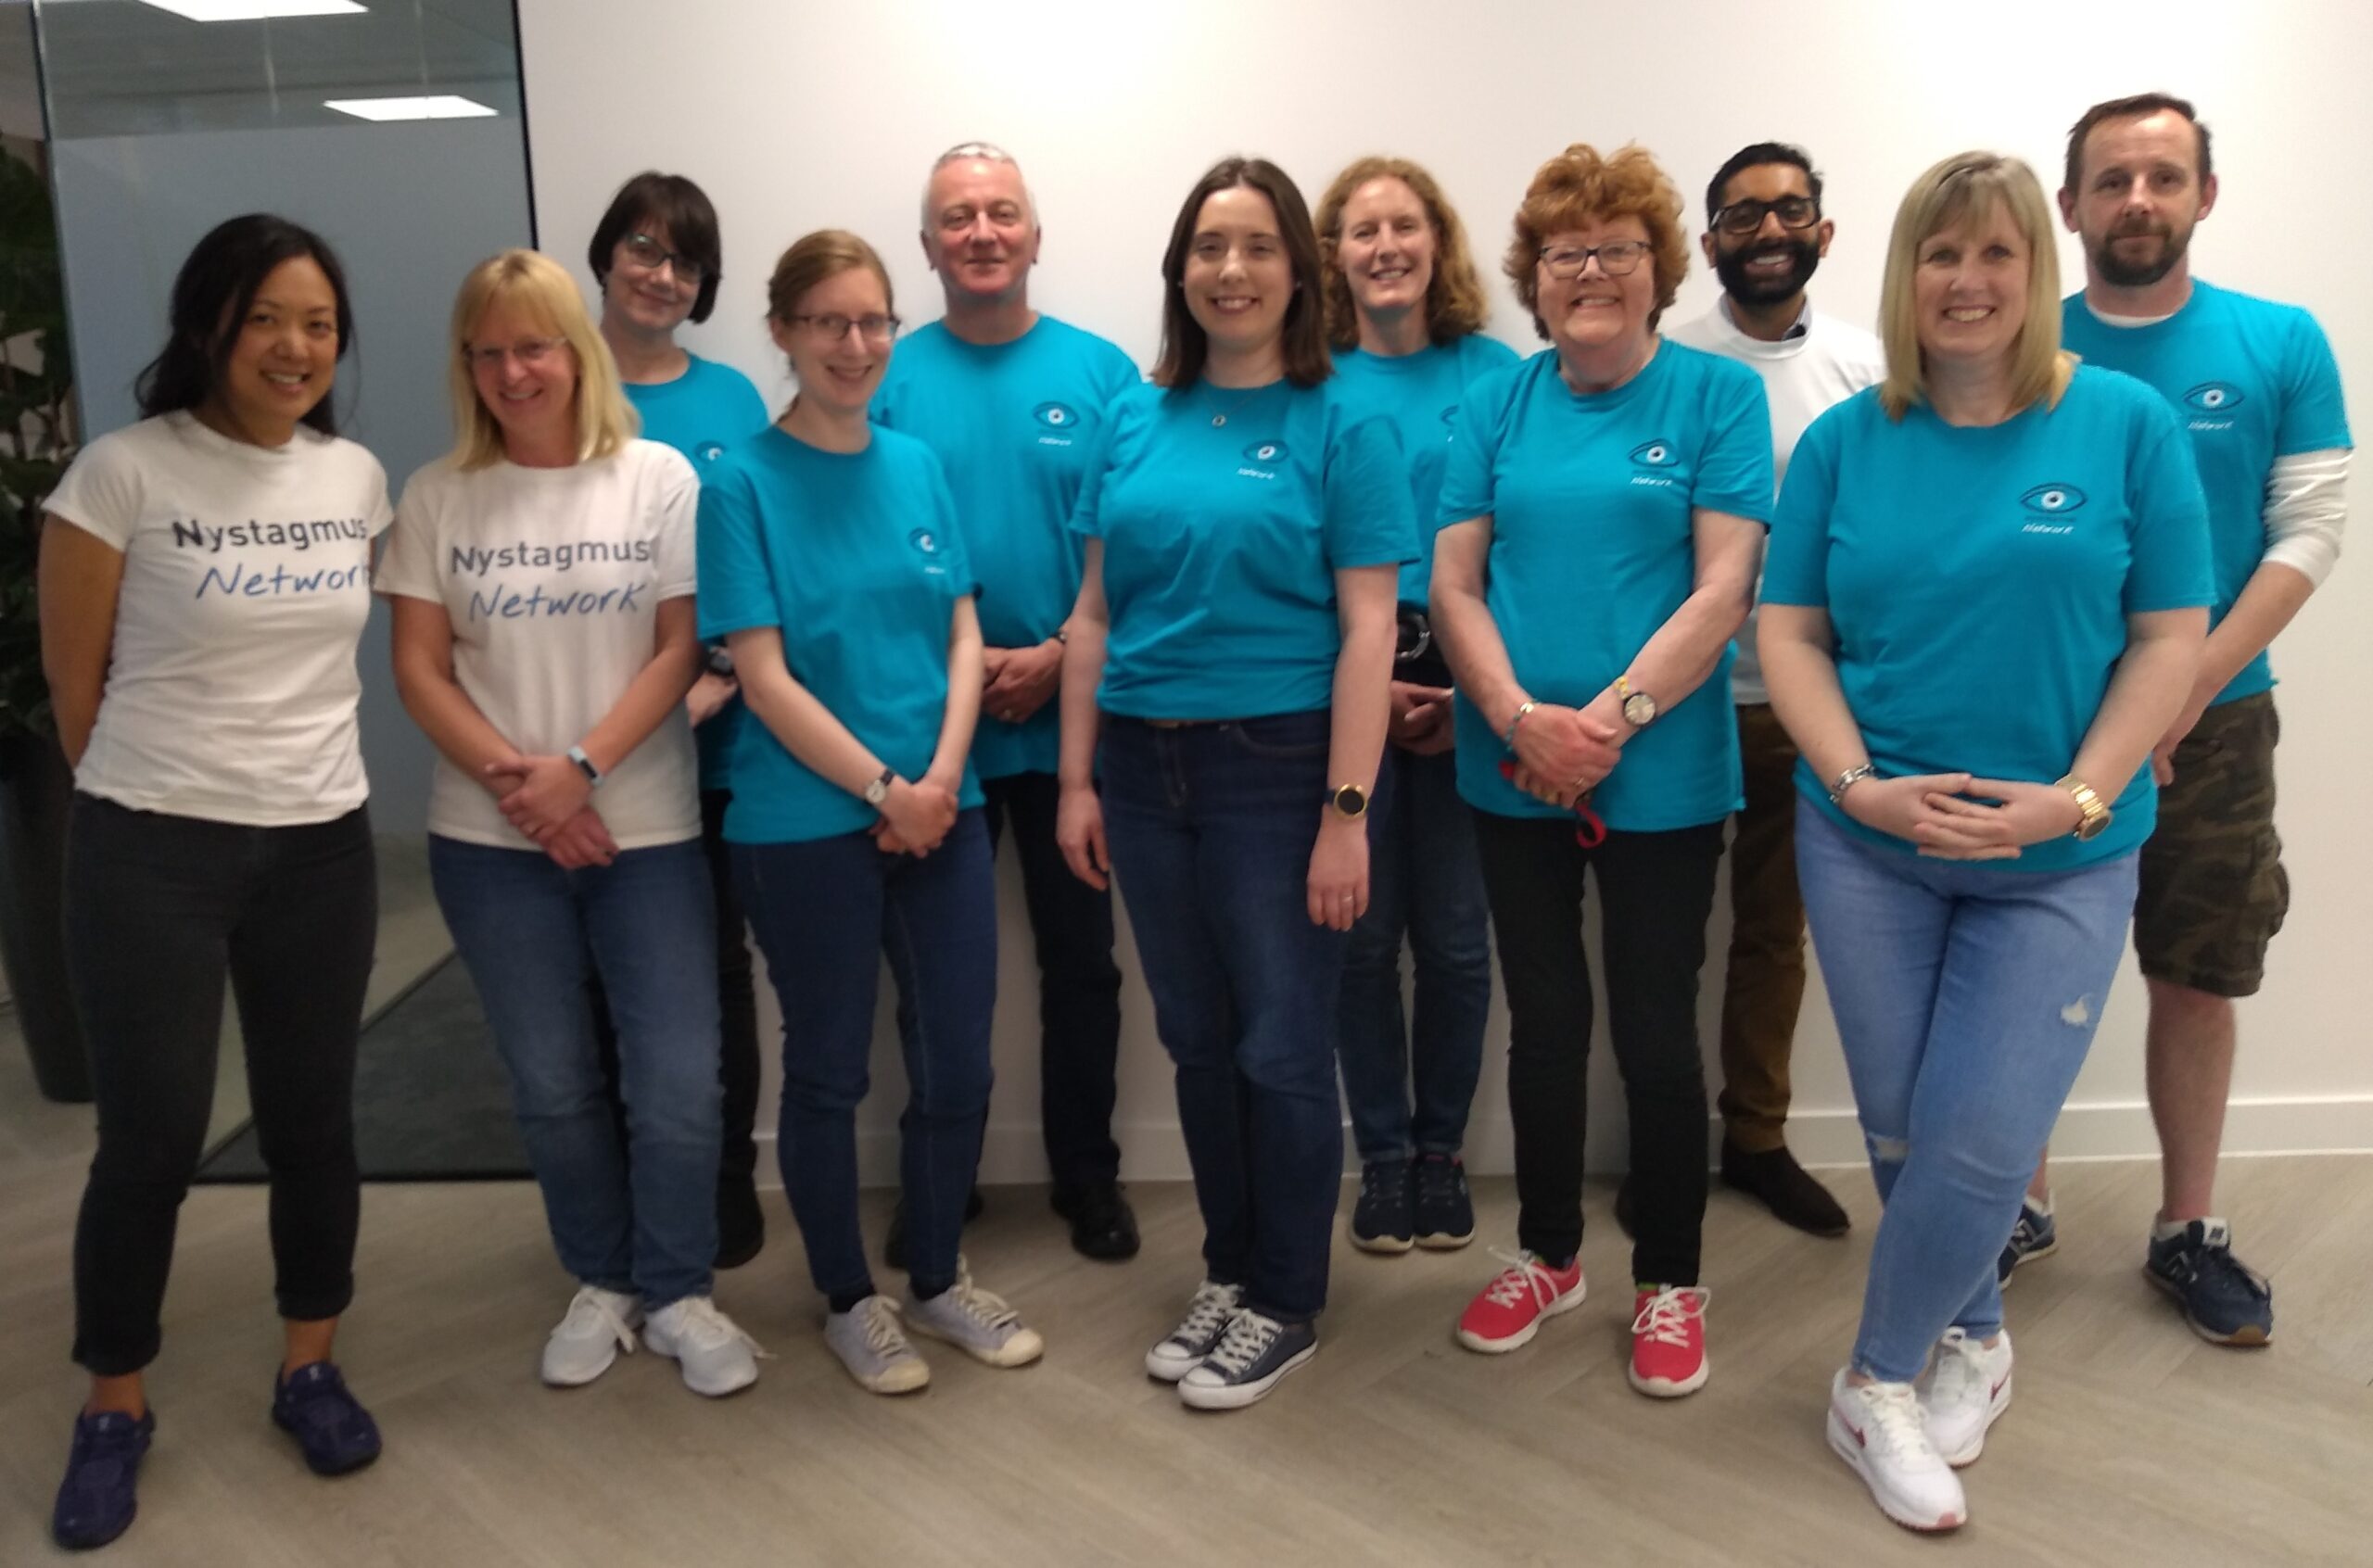 The Nystagmus Network trsutees and staff smile at the camera. They are wearing their charity T-shirts.